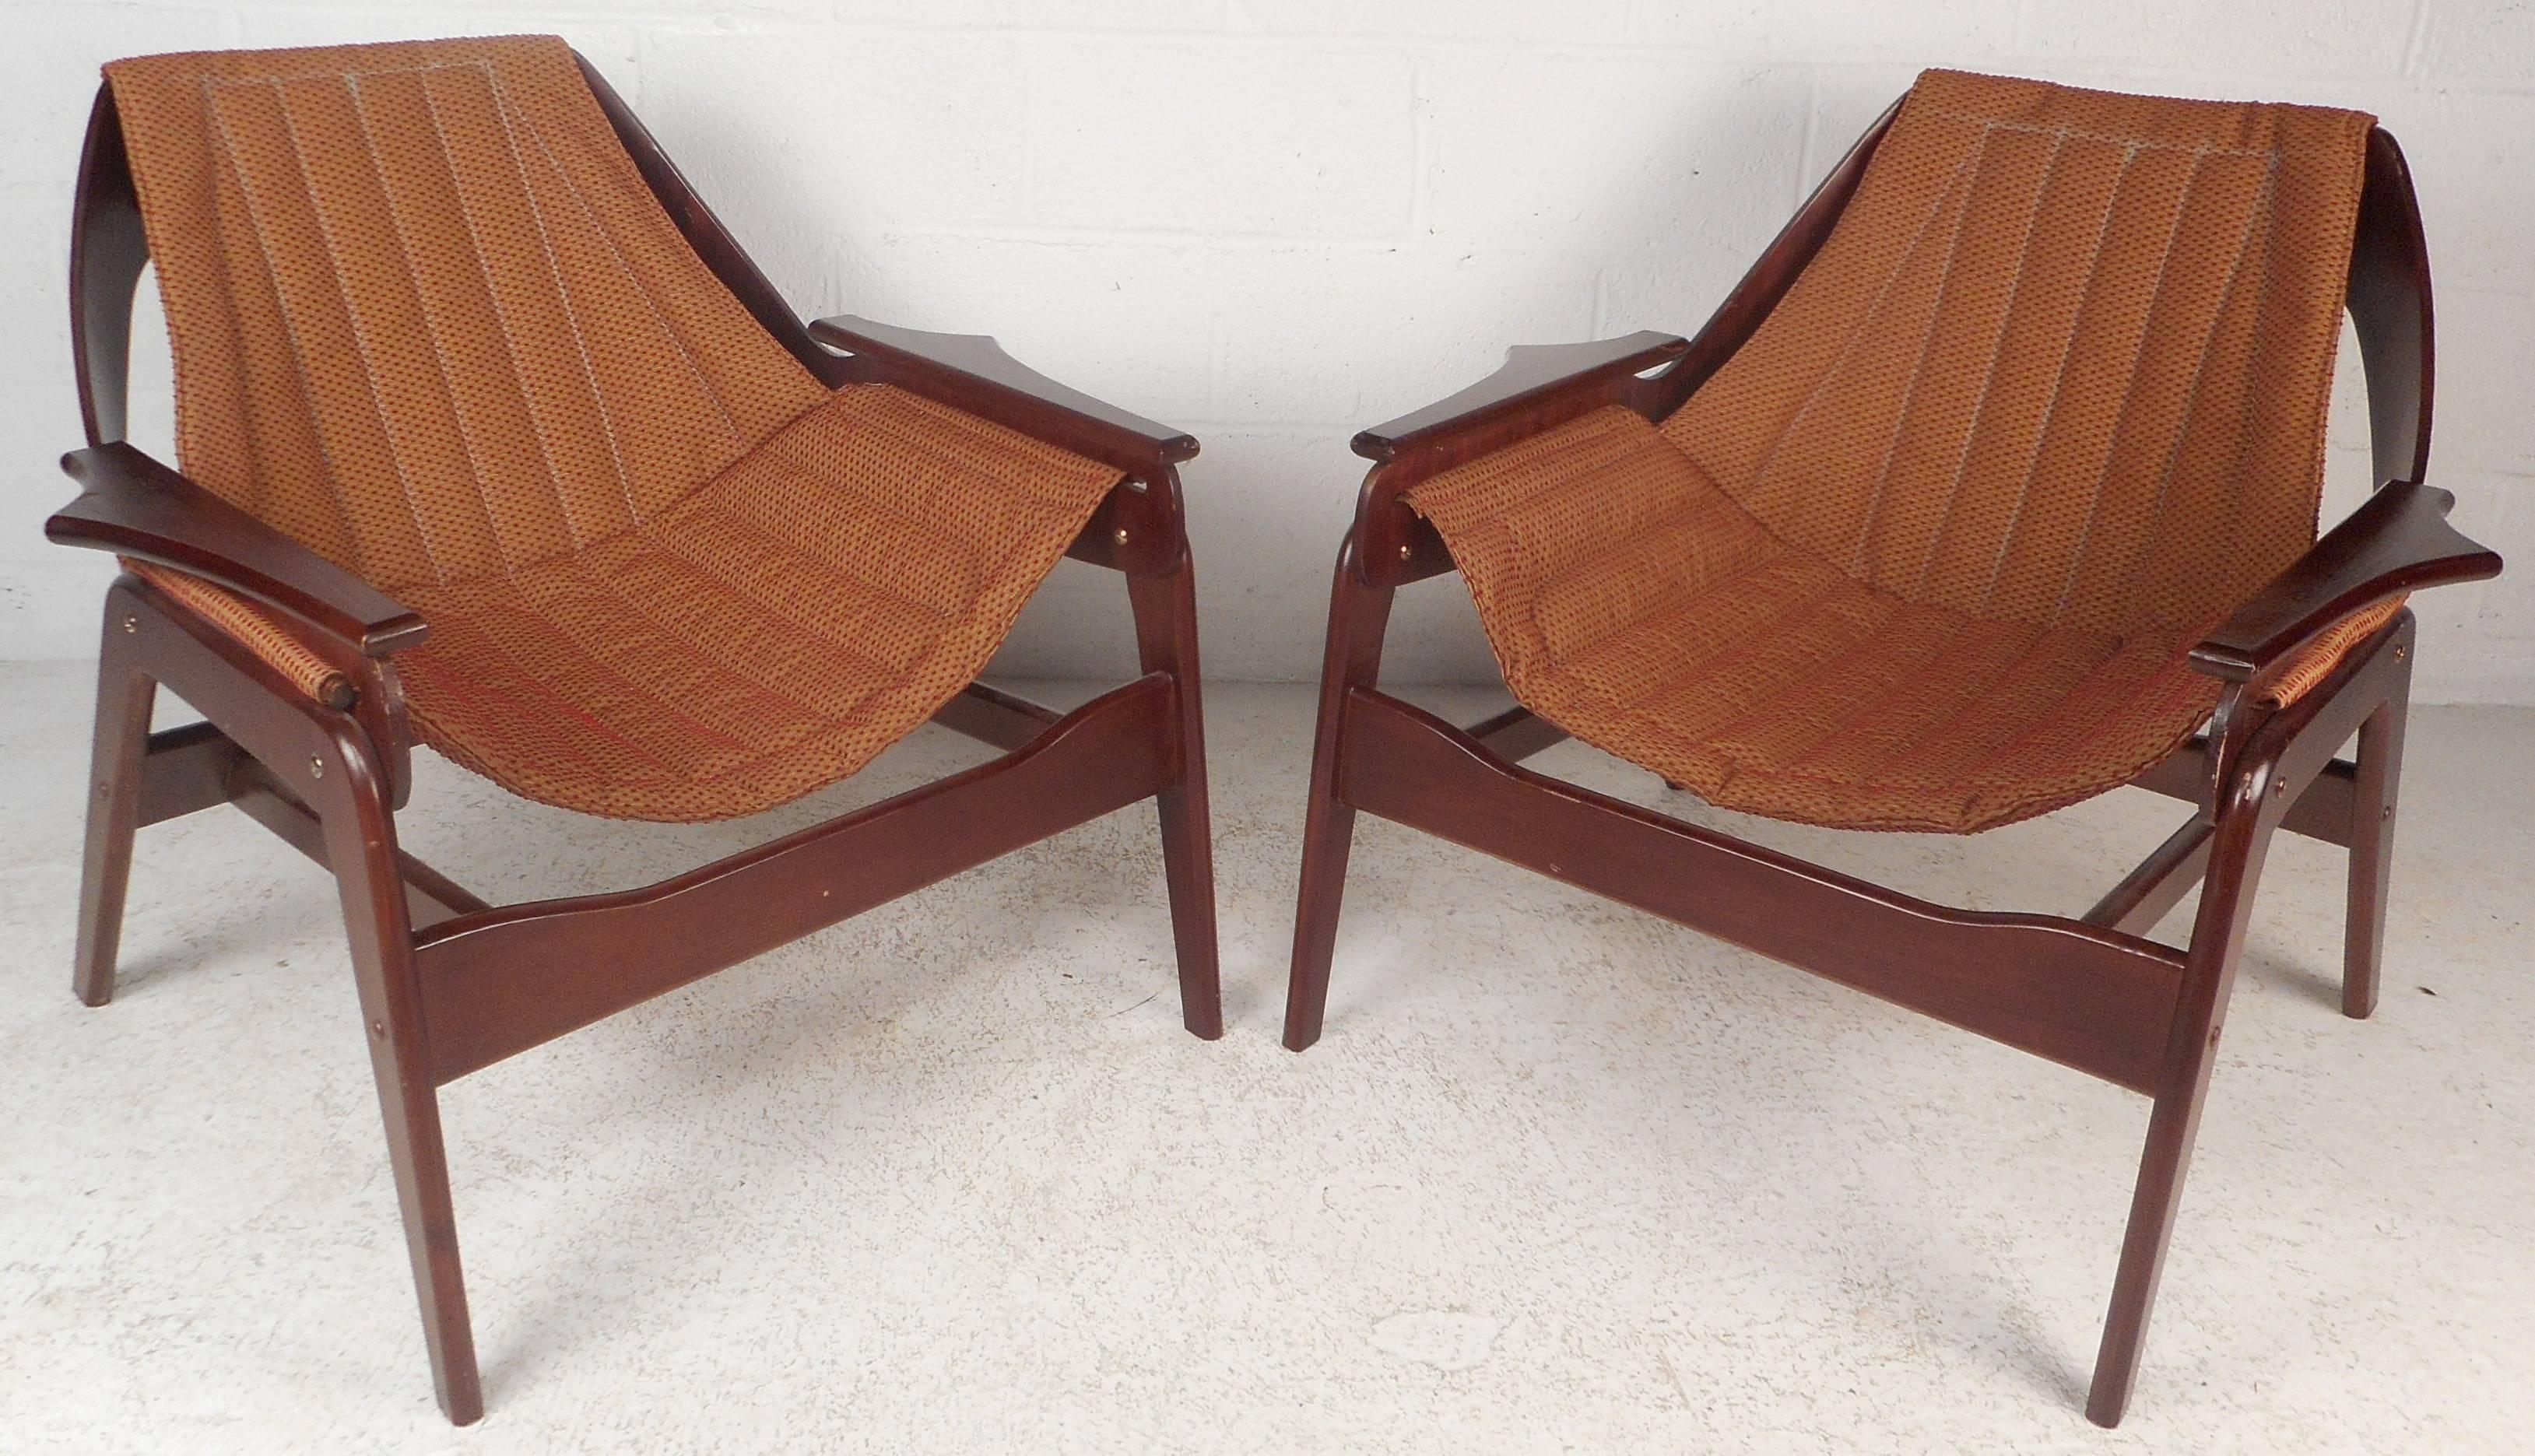 This stunning pair of vintage modern lounge chairs feature an upholstered sling design with a sturdy walnut frame. The sleek rounded backrest, angled legs, and unusual sculpted arm rests add to the allure. The unique construction offers comfort and